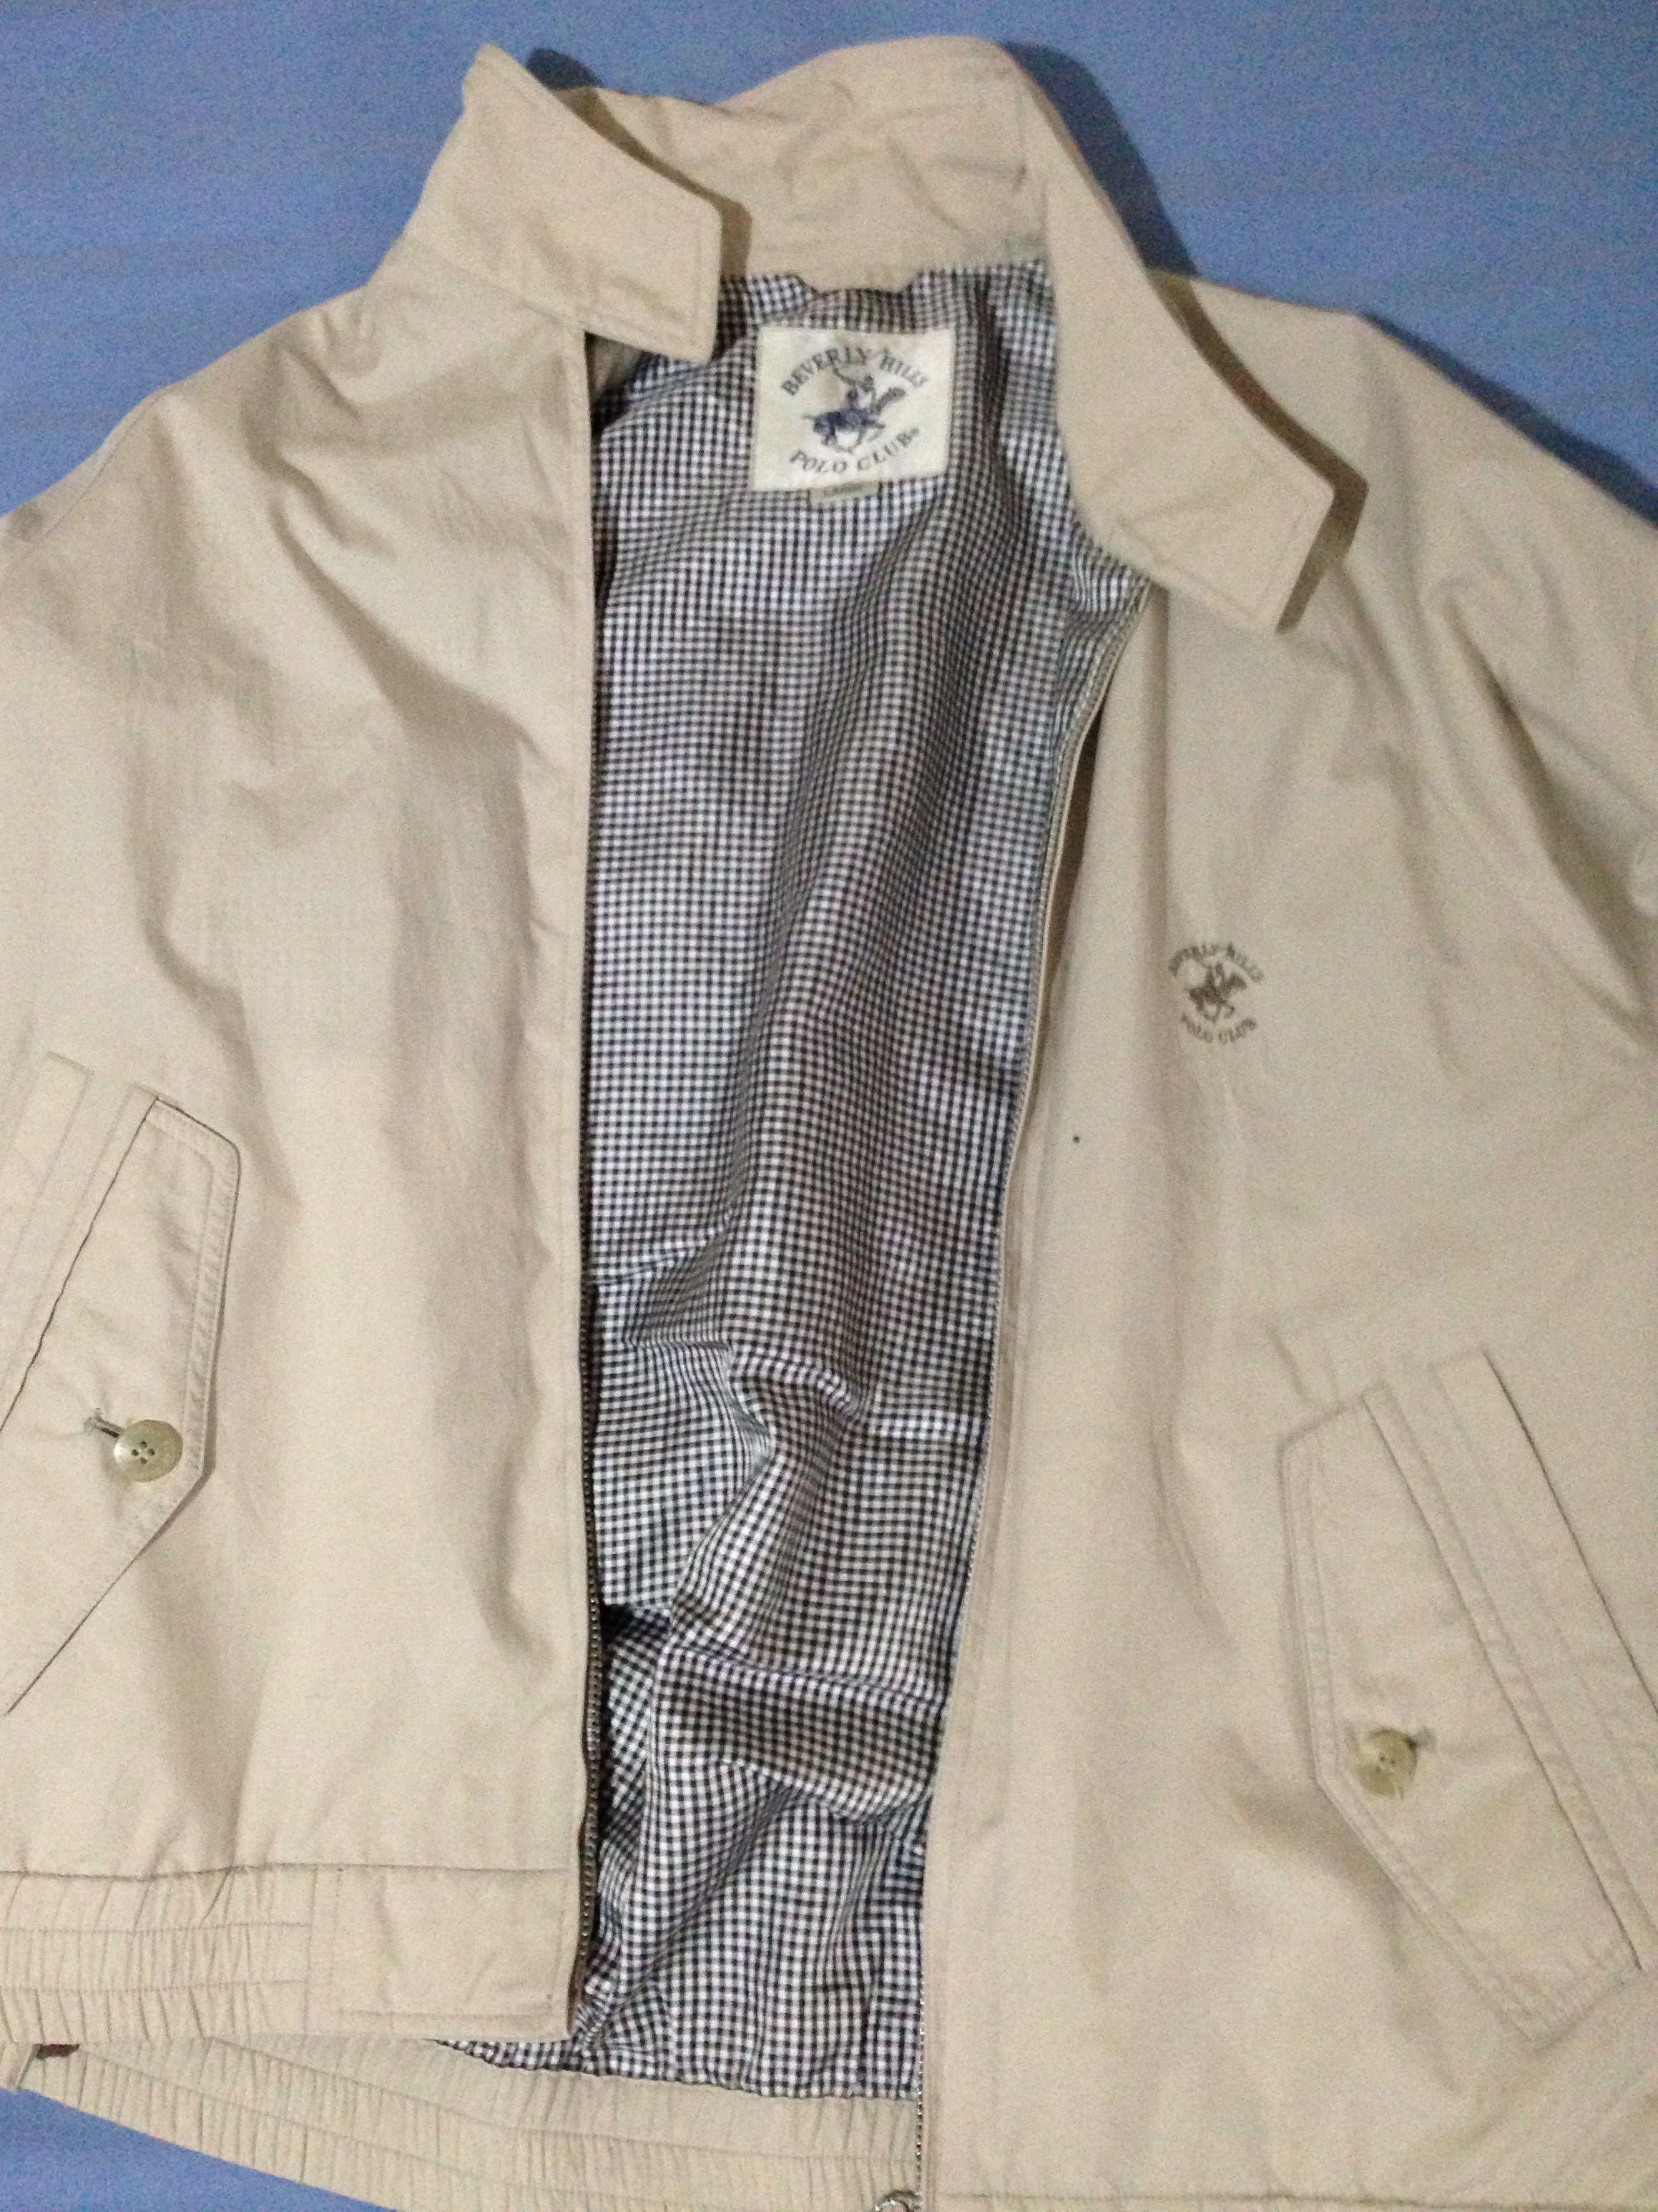 beverly hills polo club bomber jacket